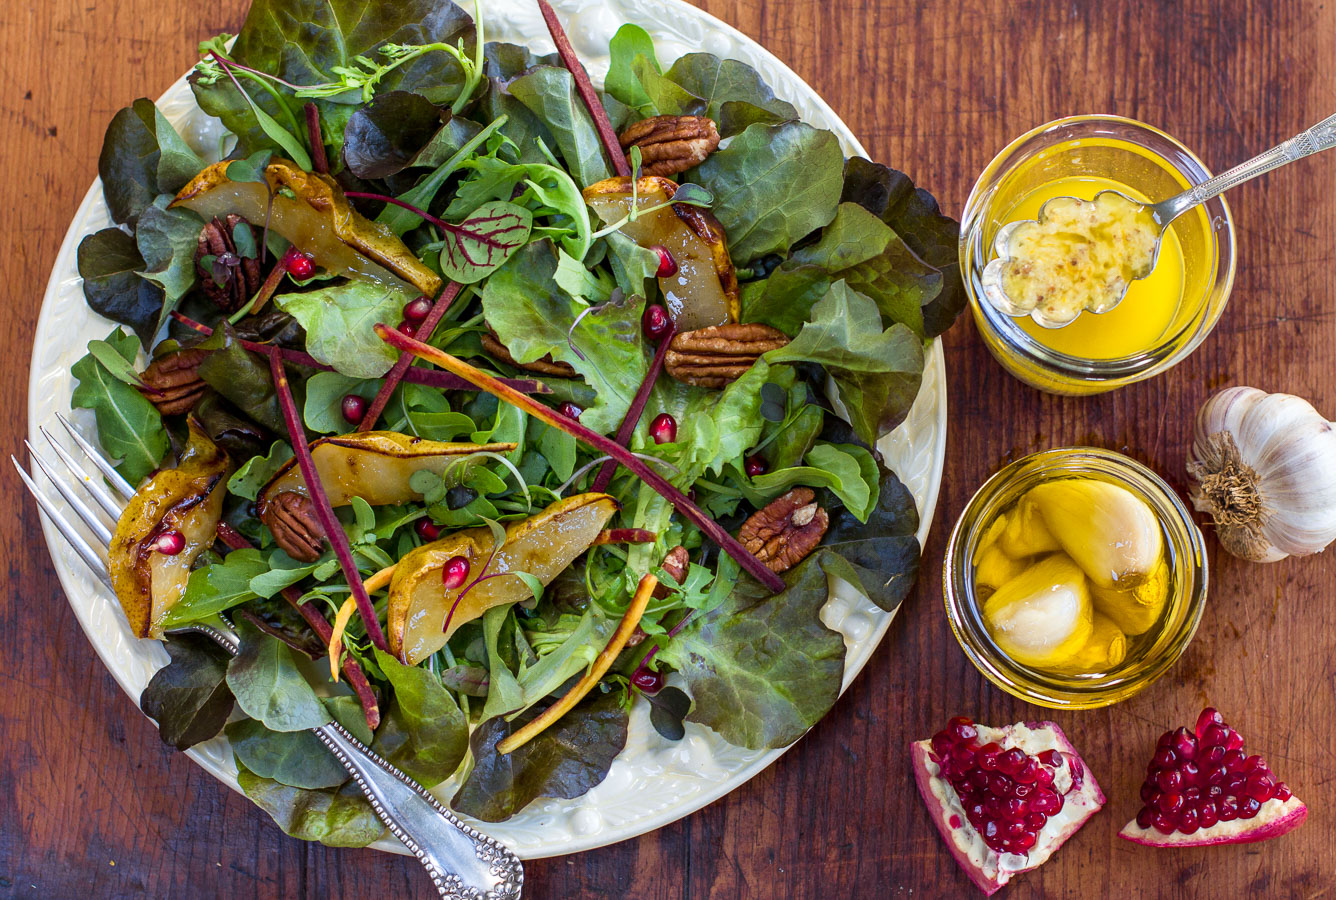 Fall Salad with Pears, Pomegranate Seeds and Zesty Garlic Confit Vinaigrette